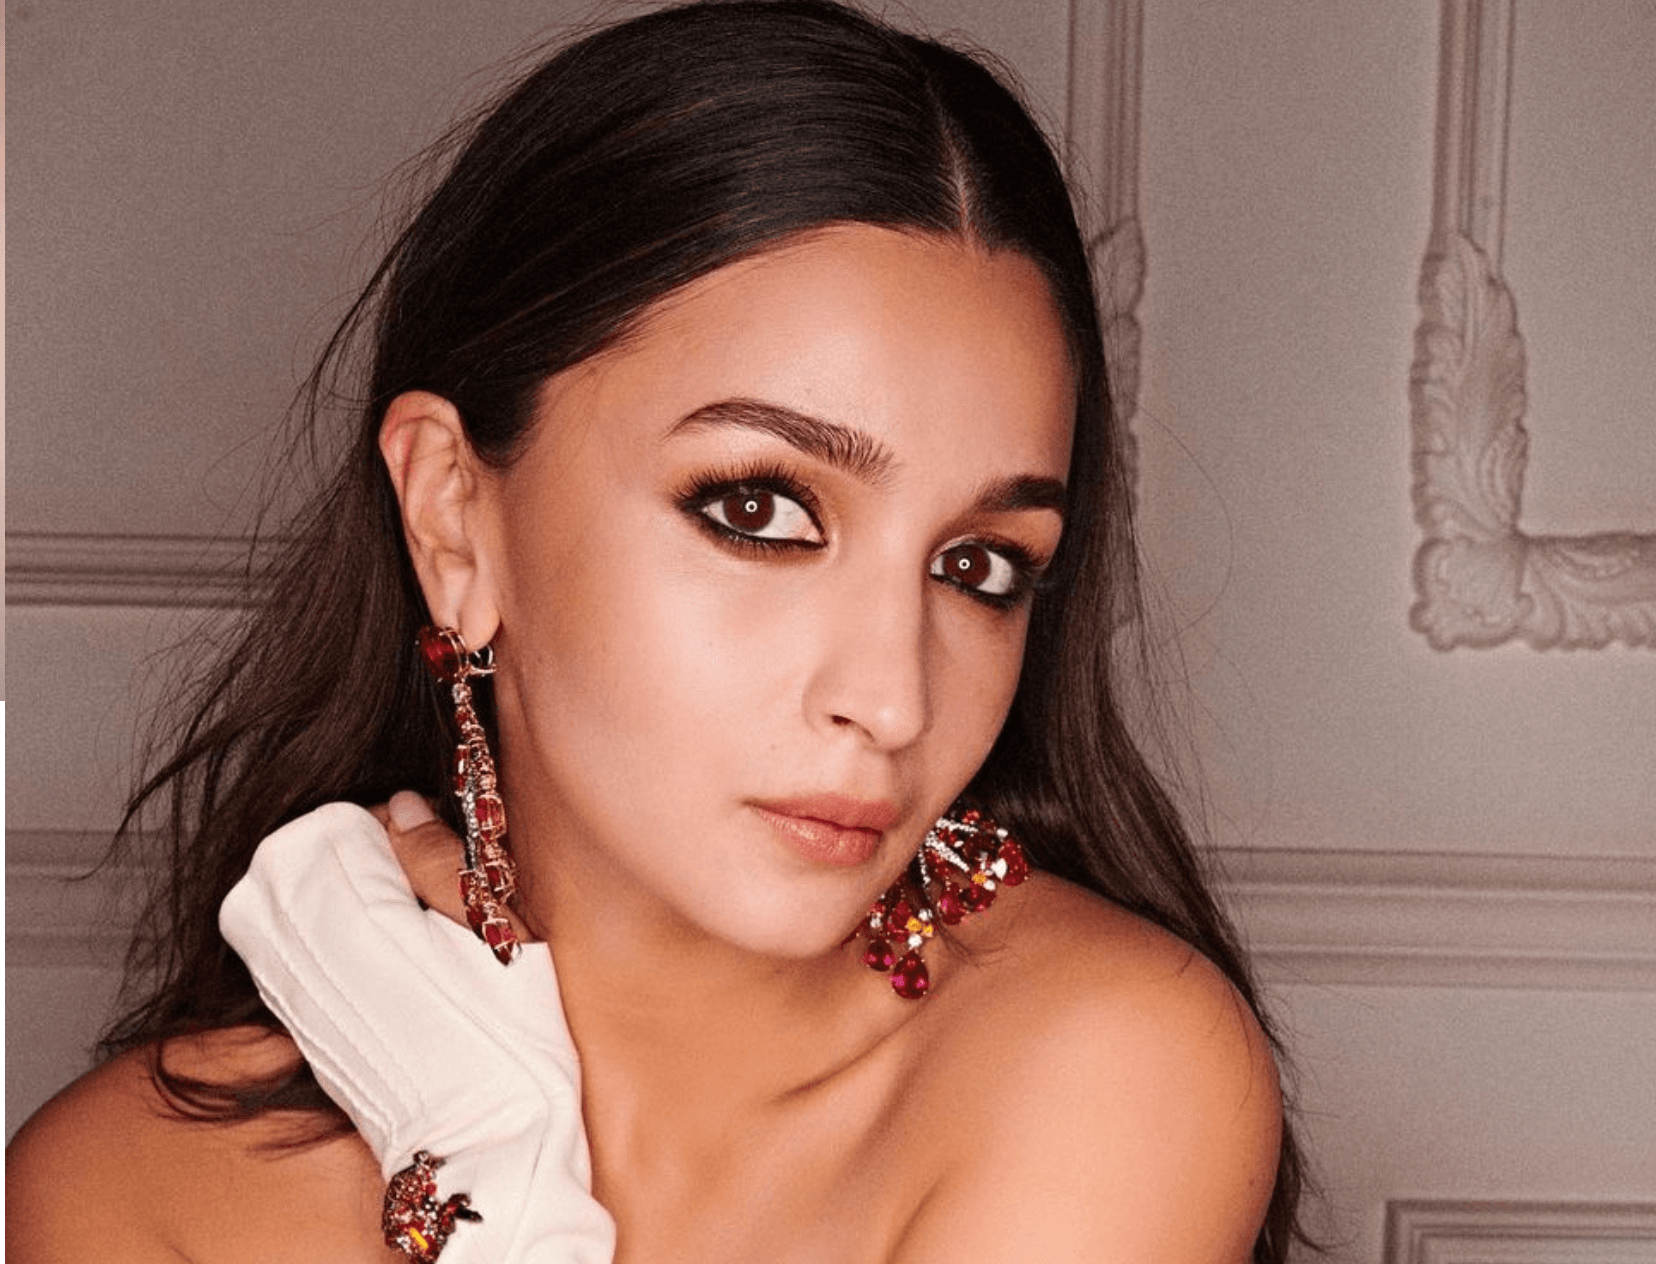 5 Of Alia Bhatt’s Looks That Are So Glamm &amp; Equally Easy To Recreate For NYE